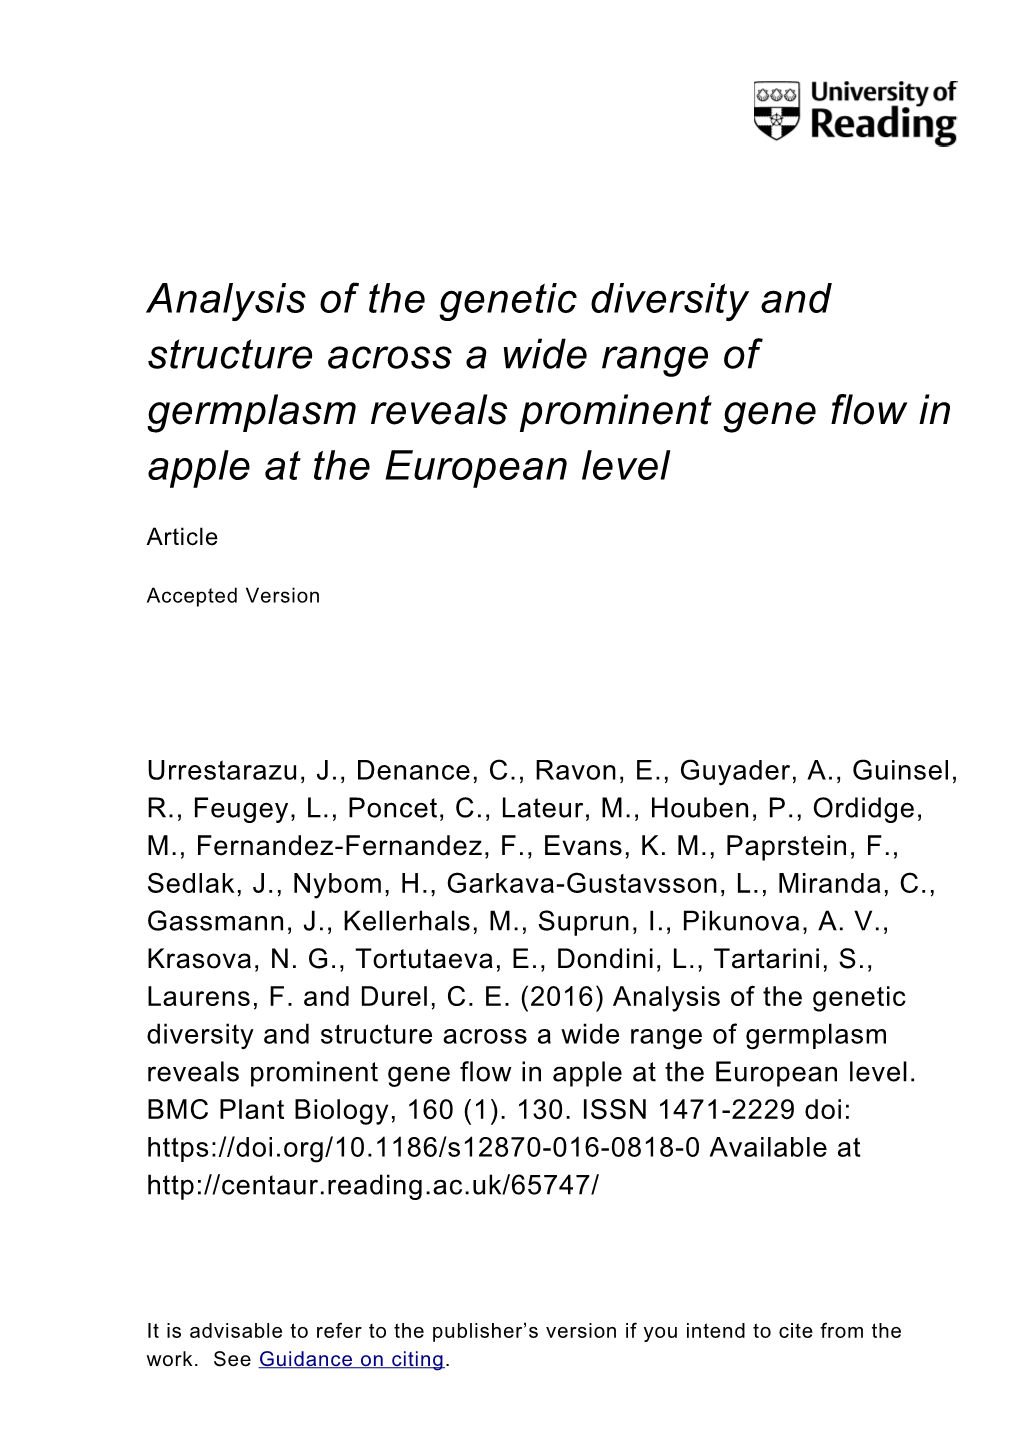 Analysis of the Genetic Diversity and Structure Across a Wide Range of Germplasm Reveals Prominent Gene Flow in Apple at the European Level